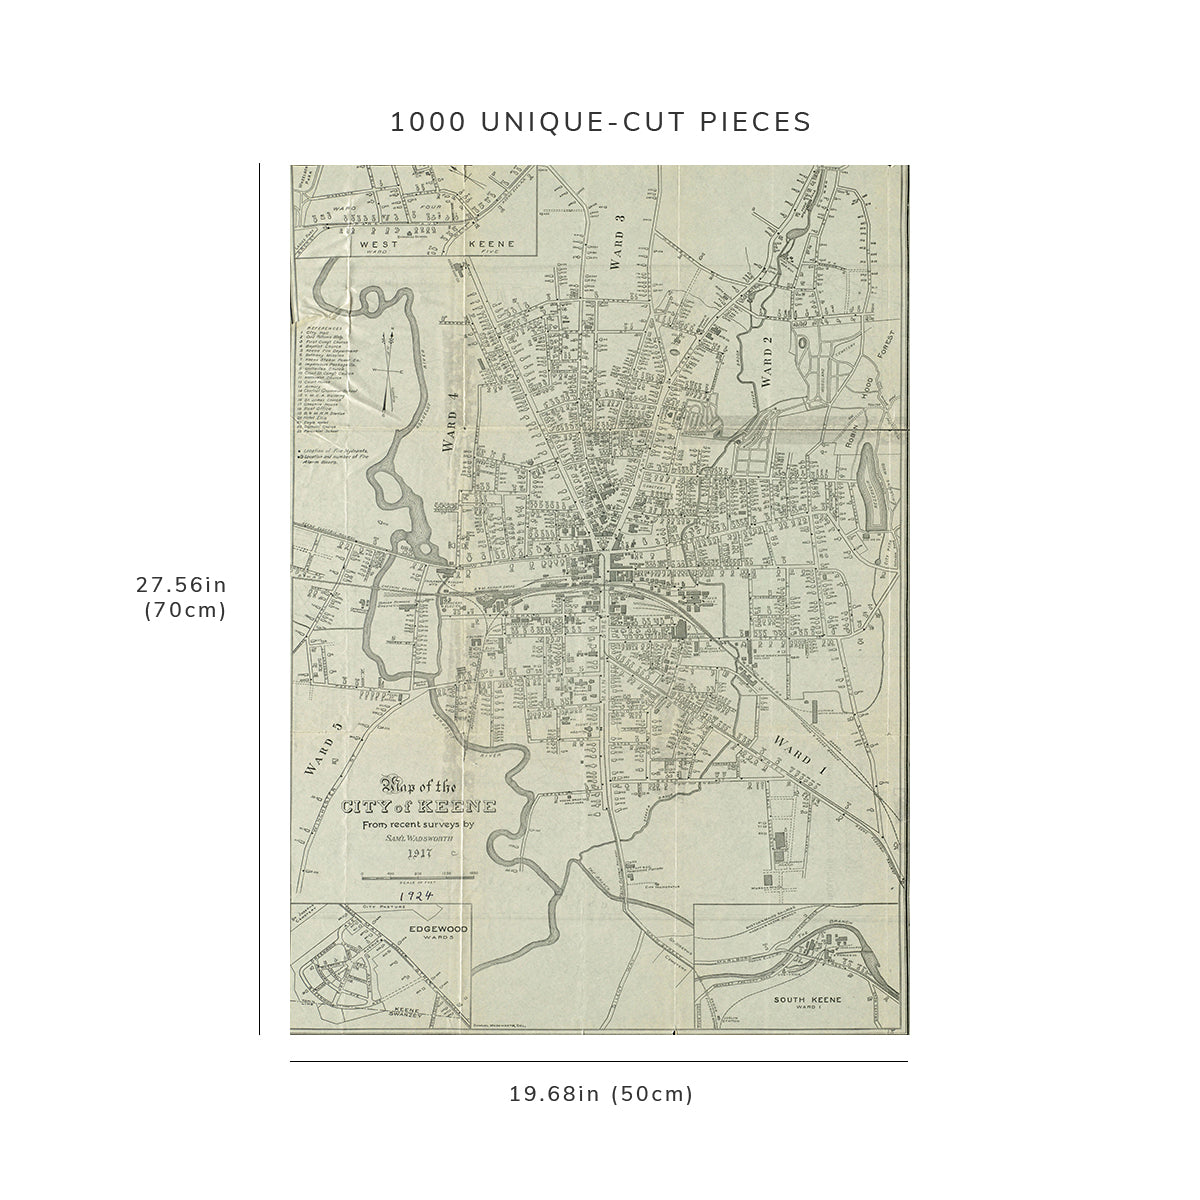 1000 Piece Jigsaw Puzzle: 1917 Map New Hampshire | Cheshire | Keene of the city of Keene